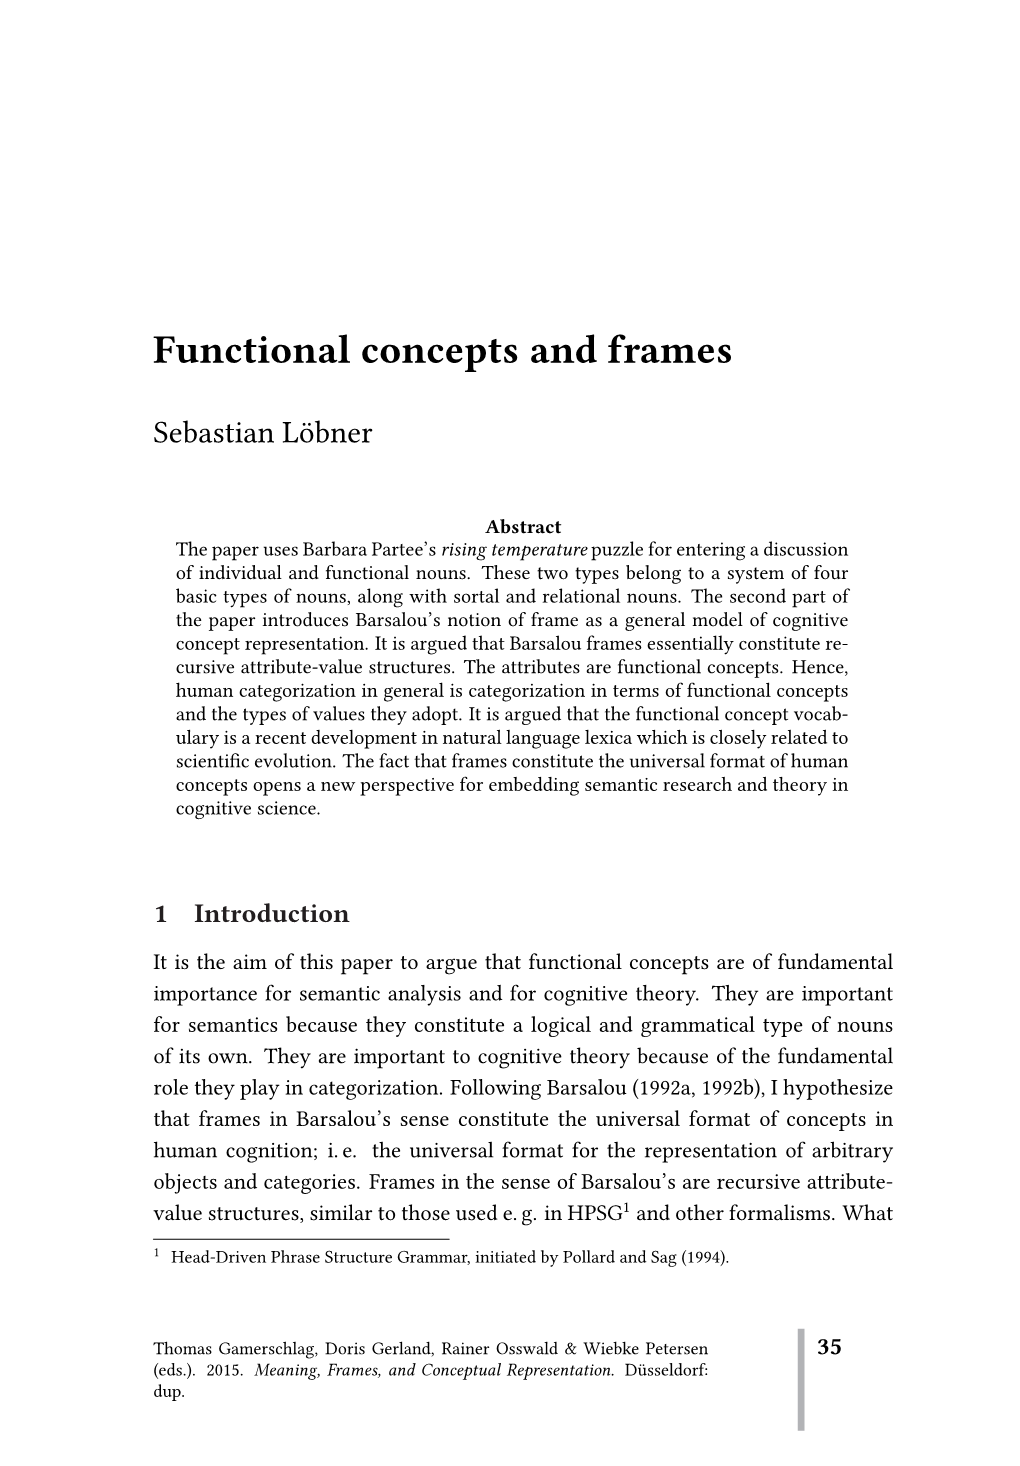 Functional Concepts and Frames